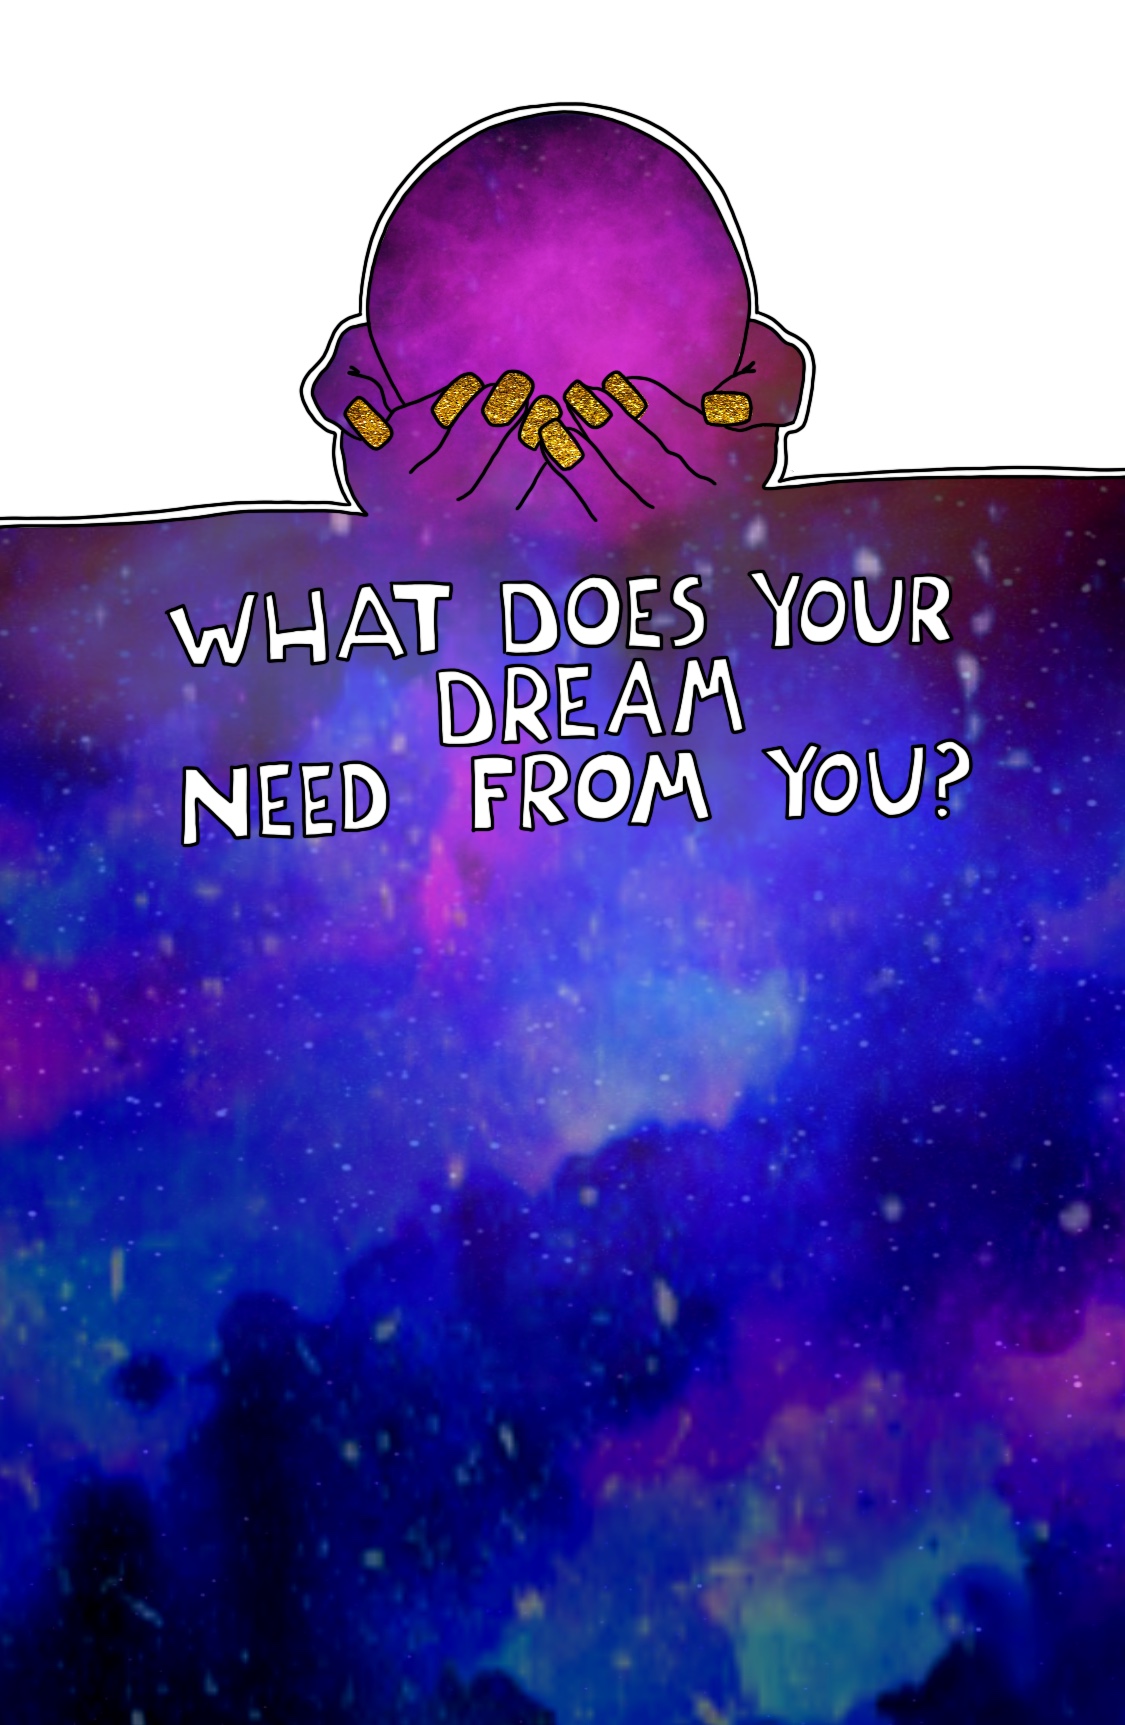 Journal Prompt: What does your dream need from you?